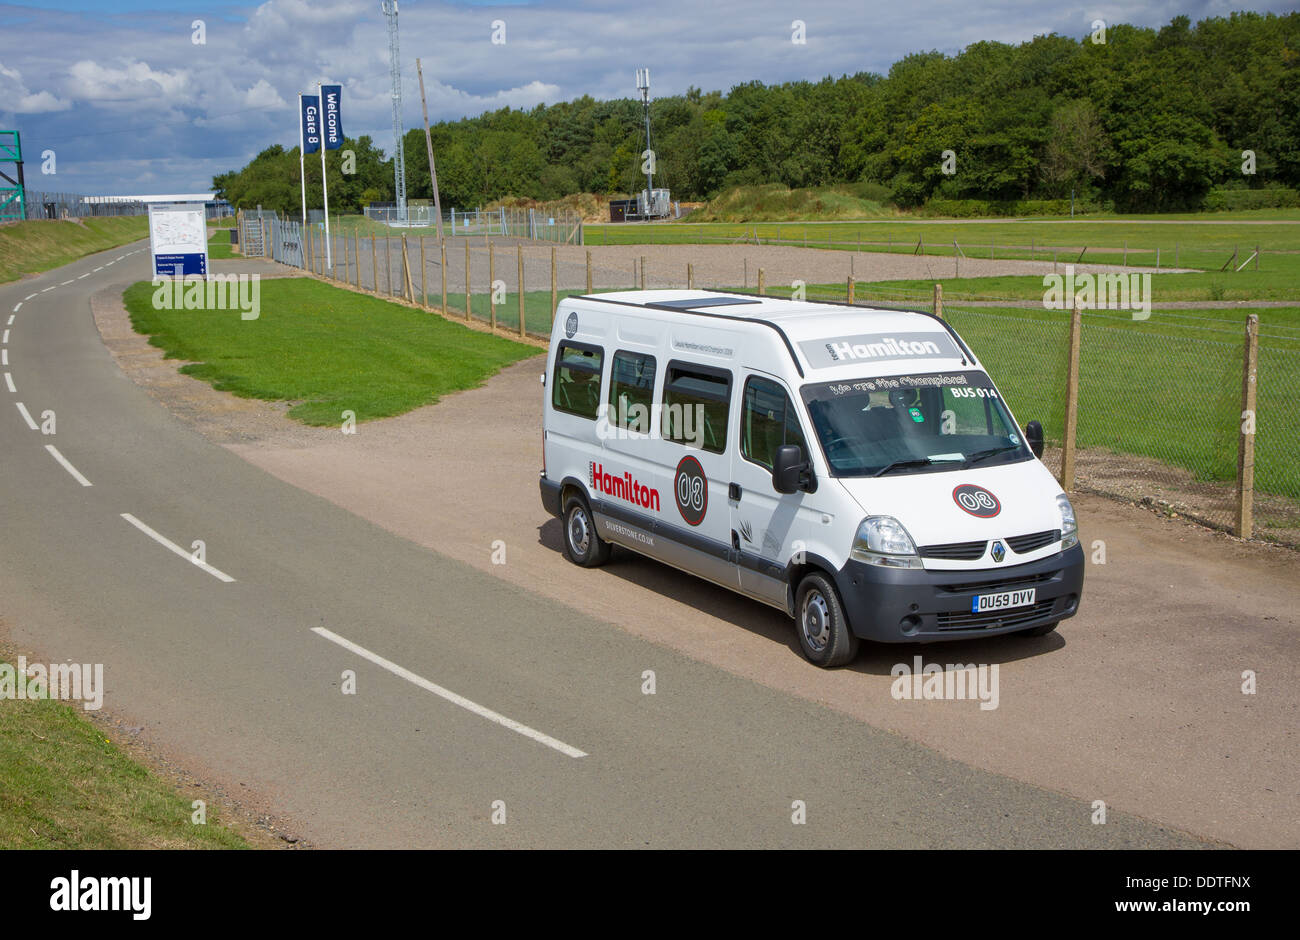 The Lewis Hamilton Minibus used for guided track tours at Silverstone Racing Circuit Stock Photo